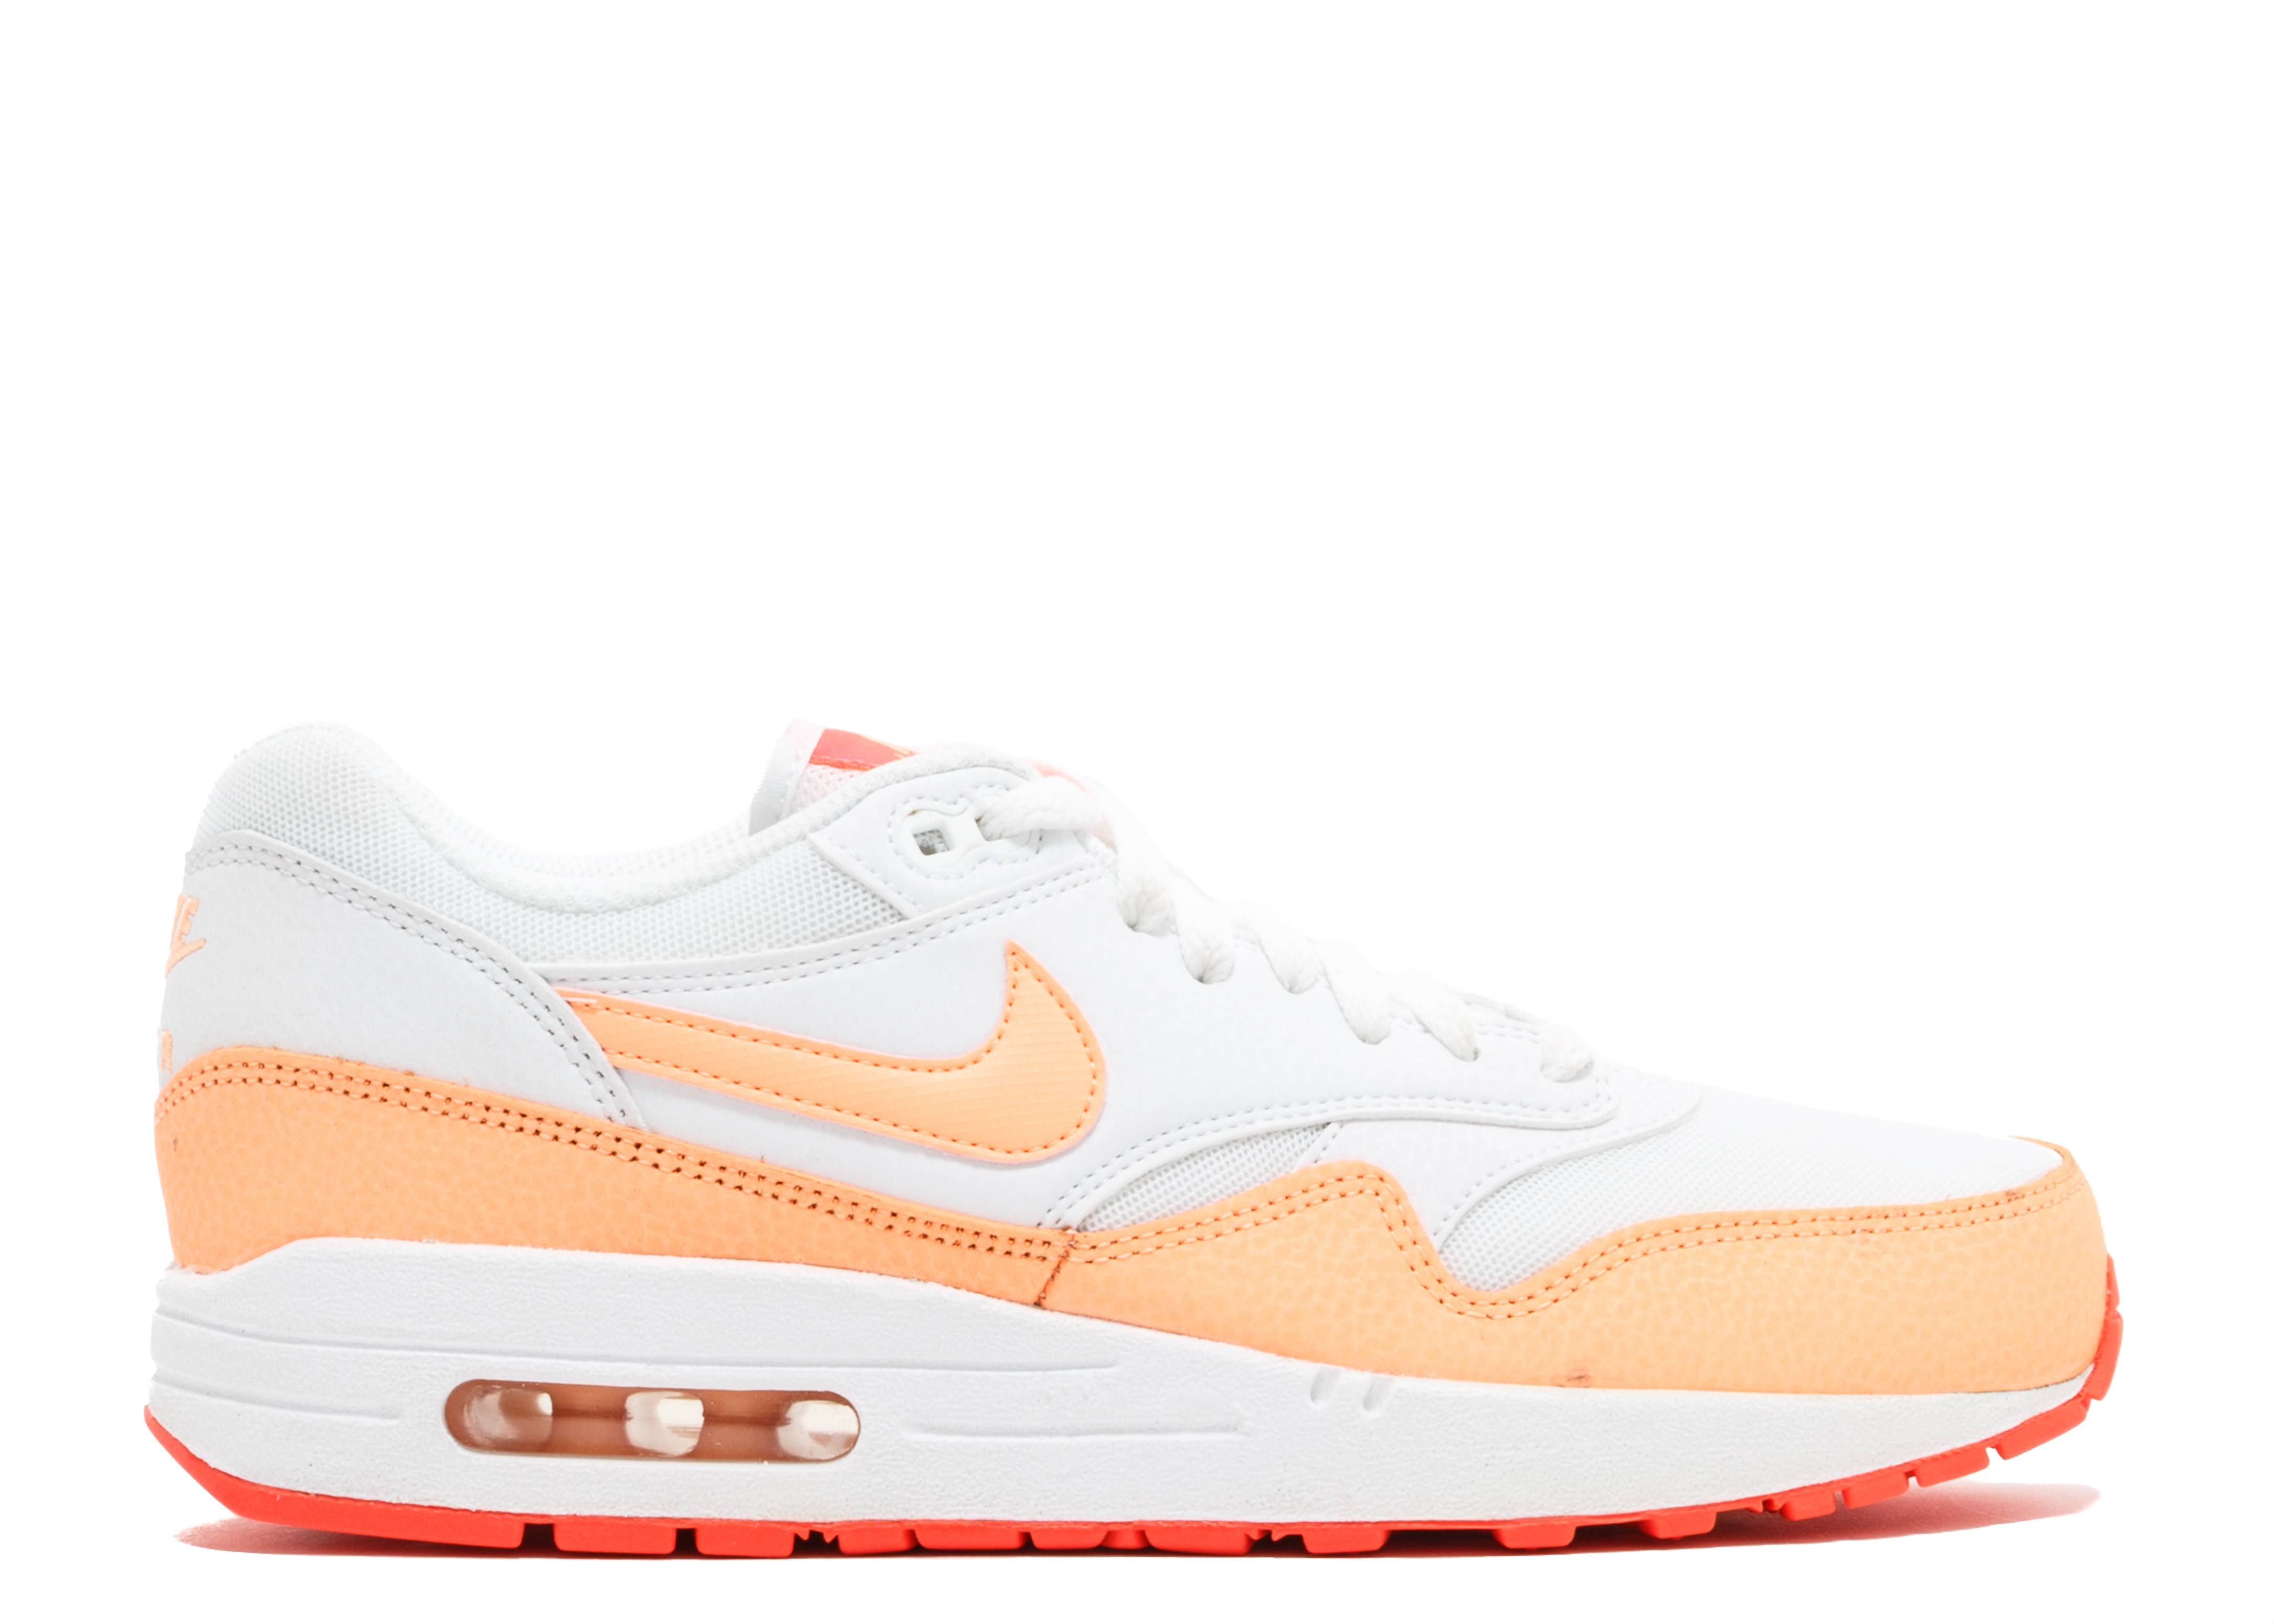 Wmns Air Max 1 'Sunset Glow'